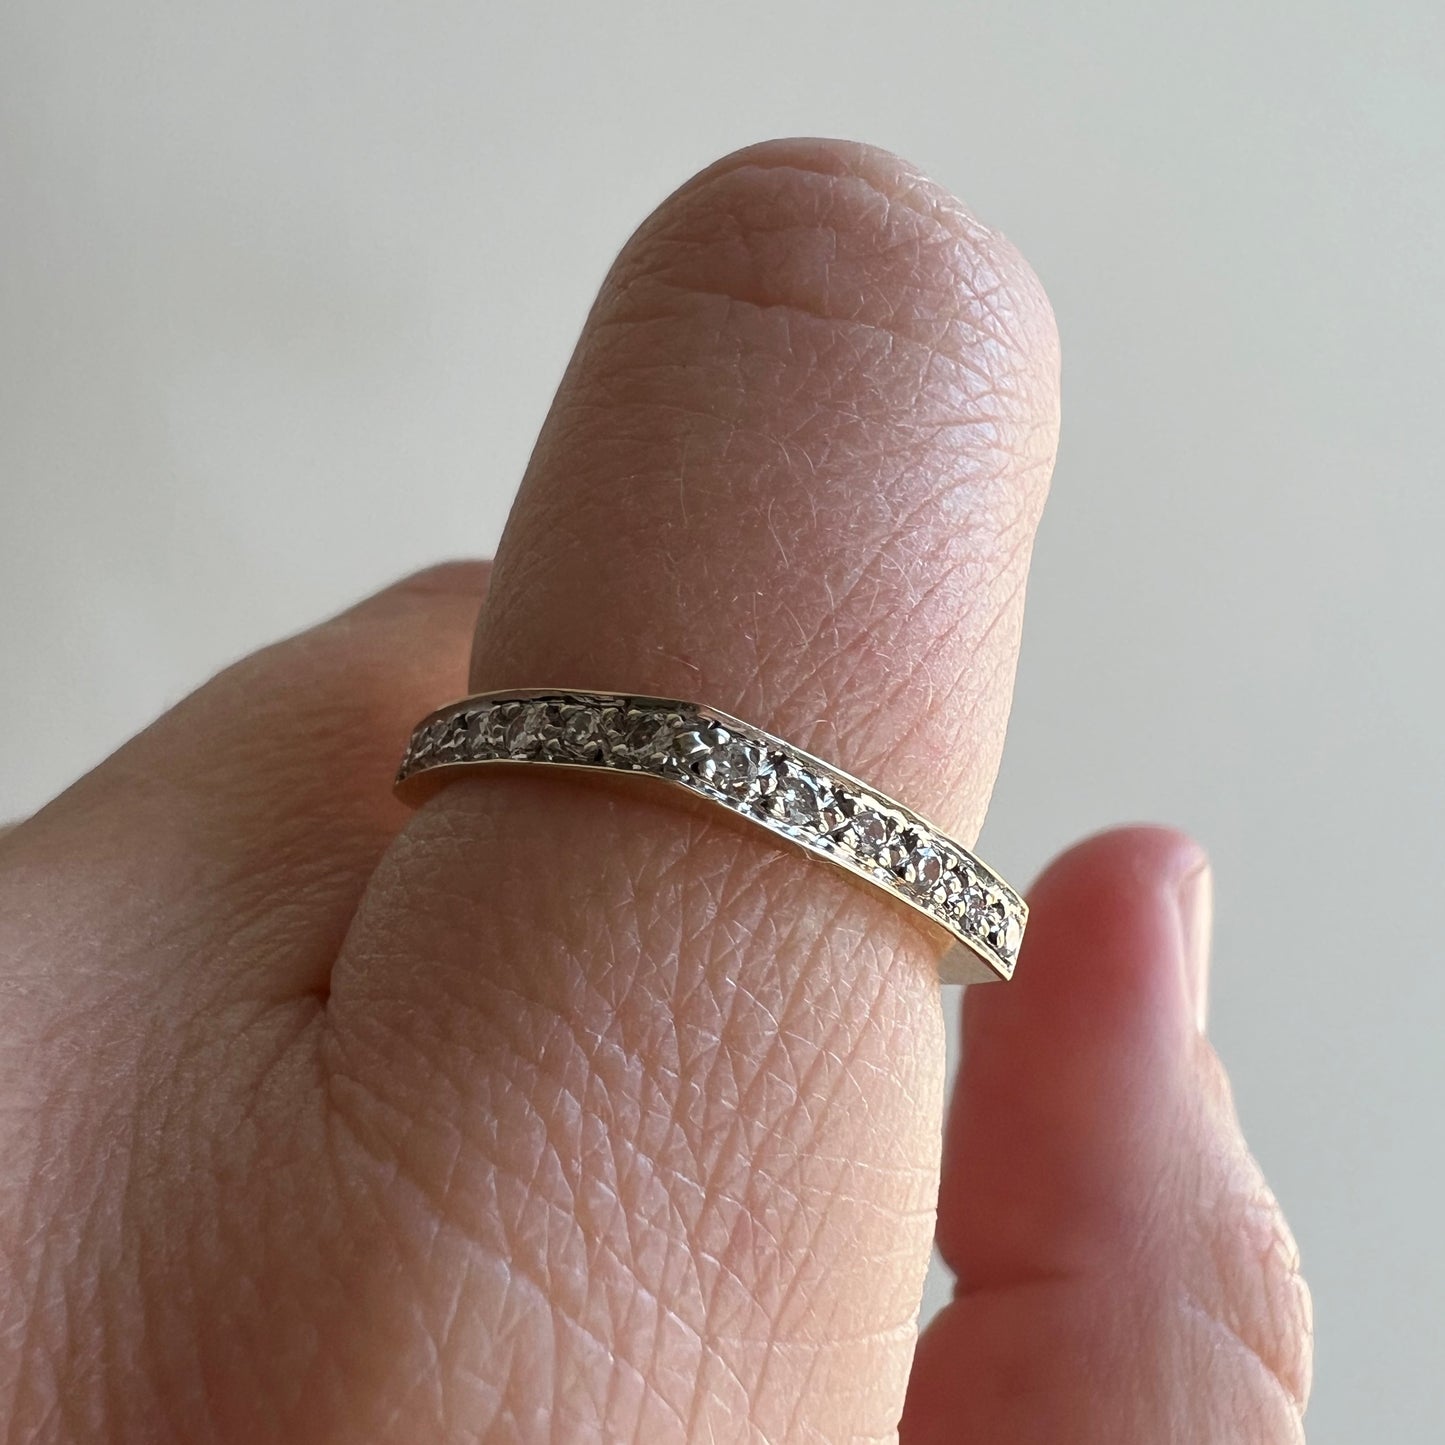 V I N T A G E // shape play / 14k yellow and white gold band with diamonds / size 5.75